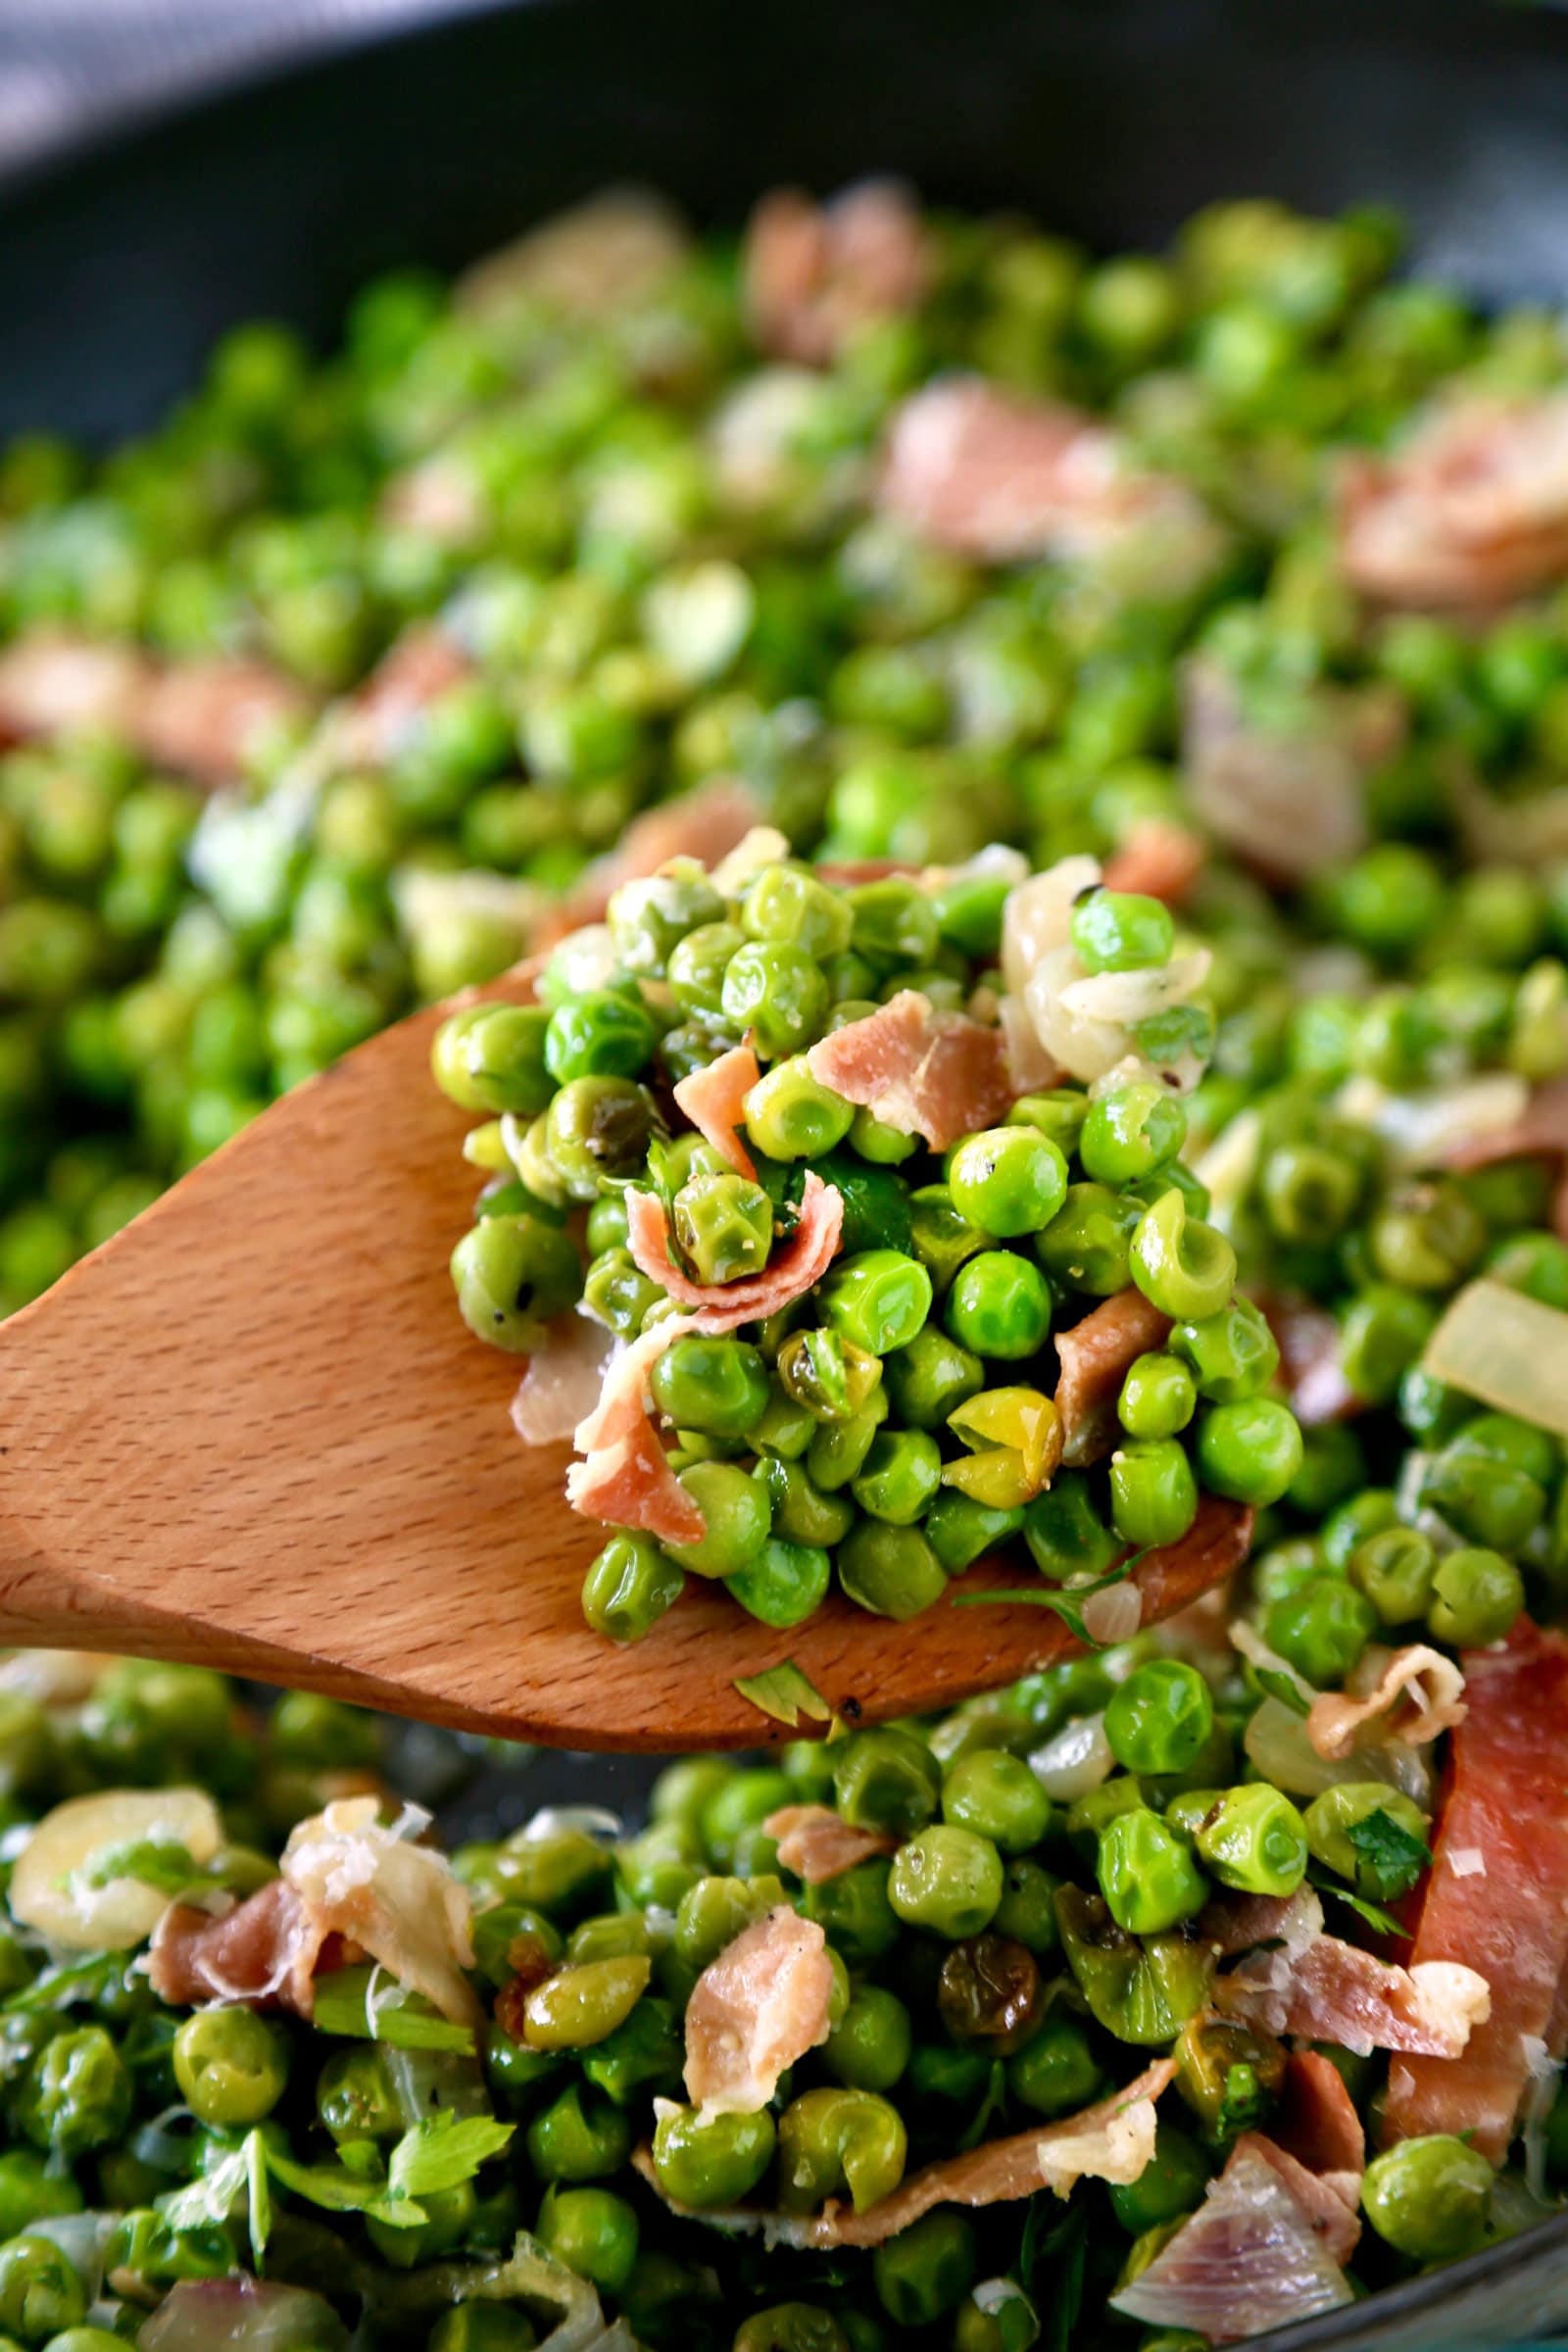 Sautéed Peas with Shallots and Prosciutto | An easy, go-to side dish that's made in just 15 minutes and uses 7 ingredients!  Perfect for a weeknight meal or fancy holiday feast! | https://www.thechunkychef.com | #peas #side #sidedish #prosciutto #holiday